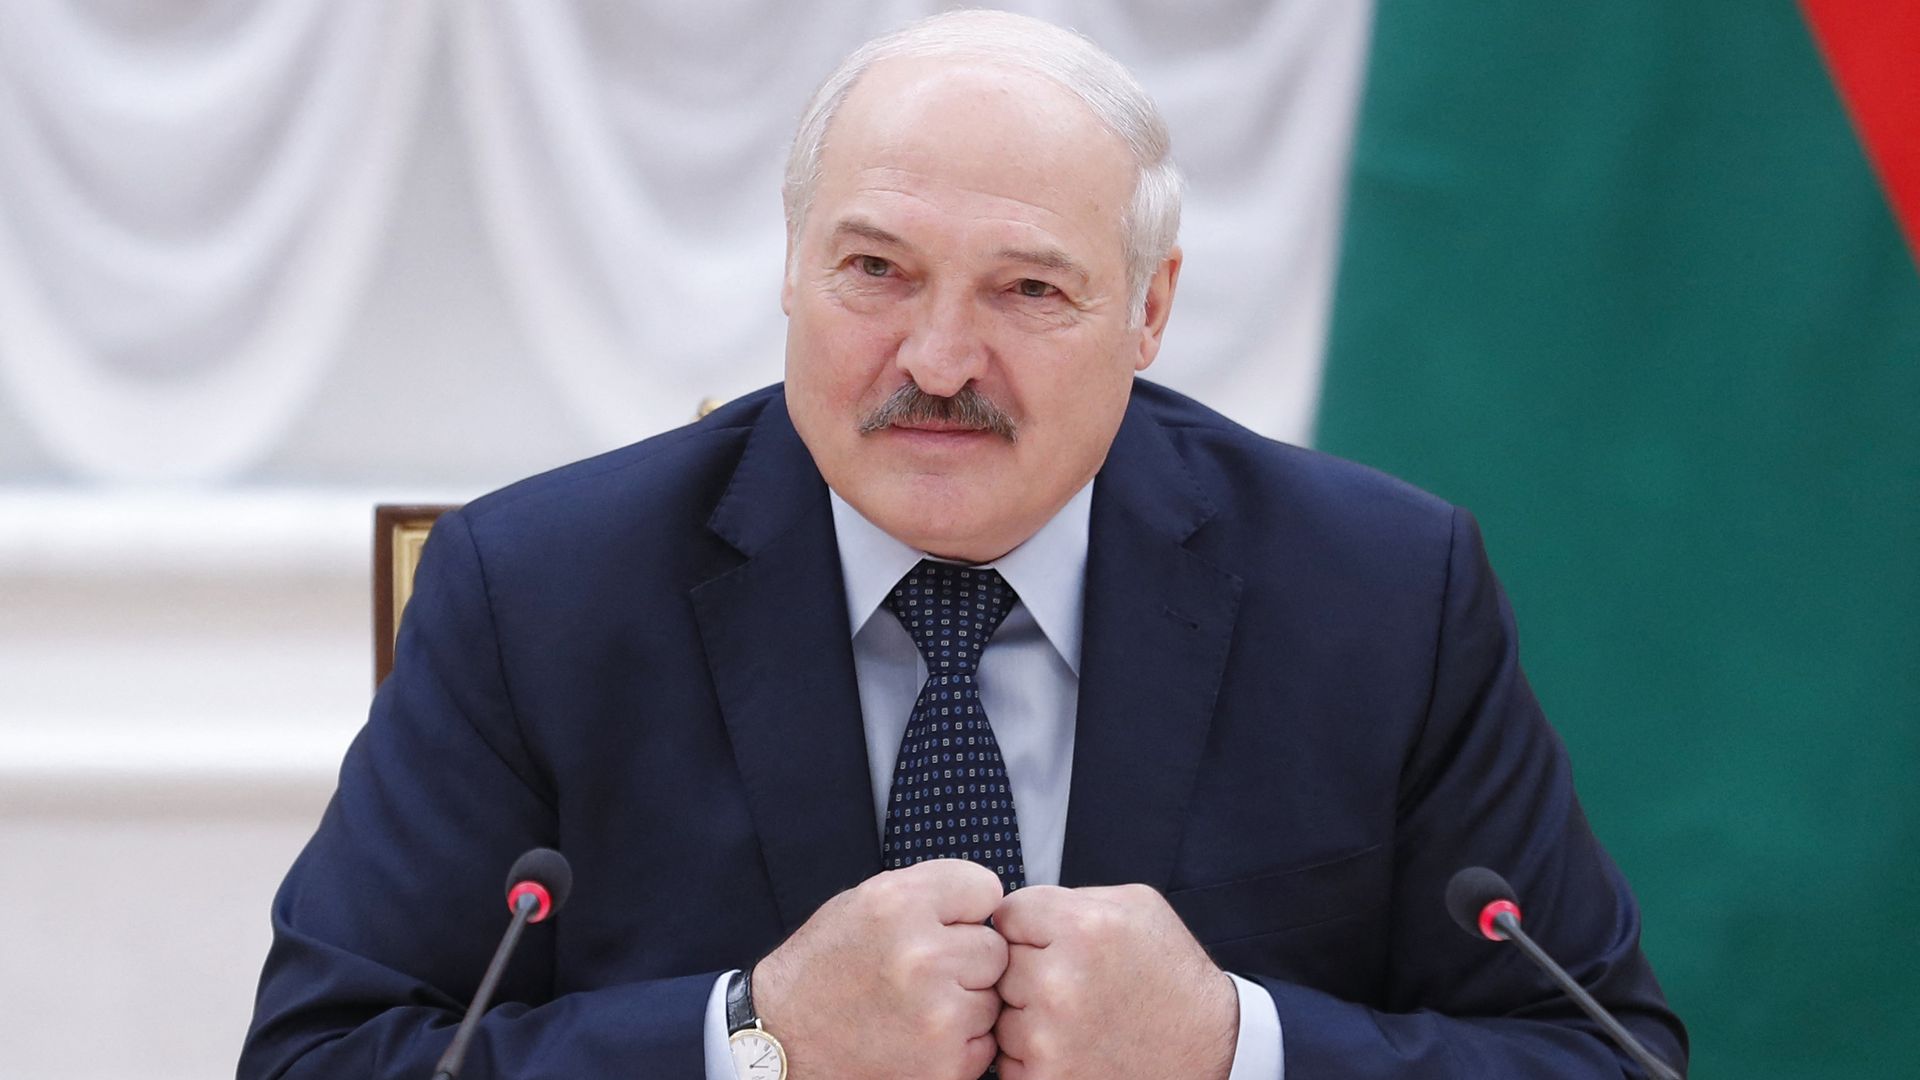 Belarusian President Alexander Lukashenko speaks during a meeting with Commonwealth of Independent States officials in Minsk on May 28